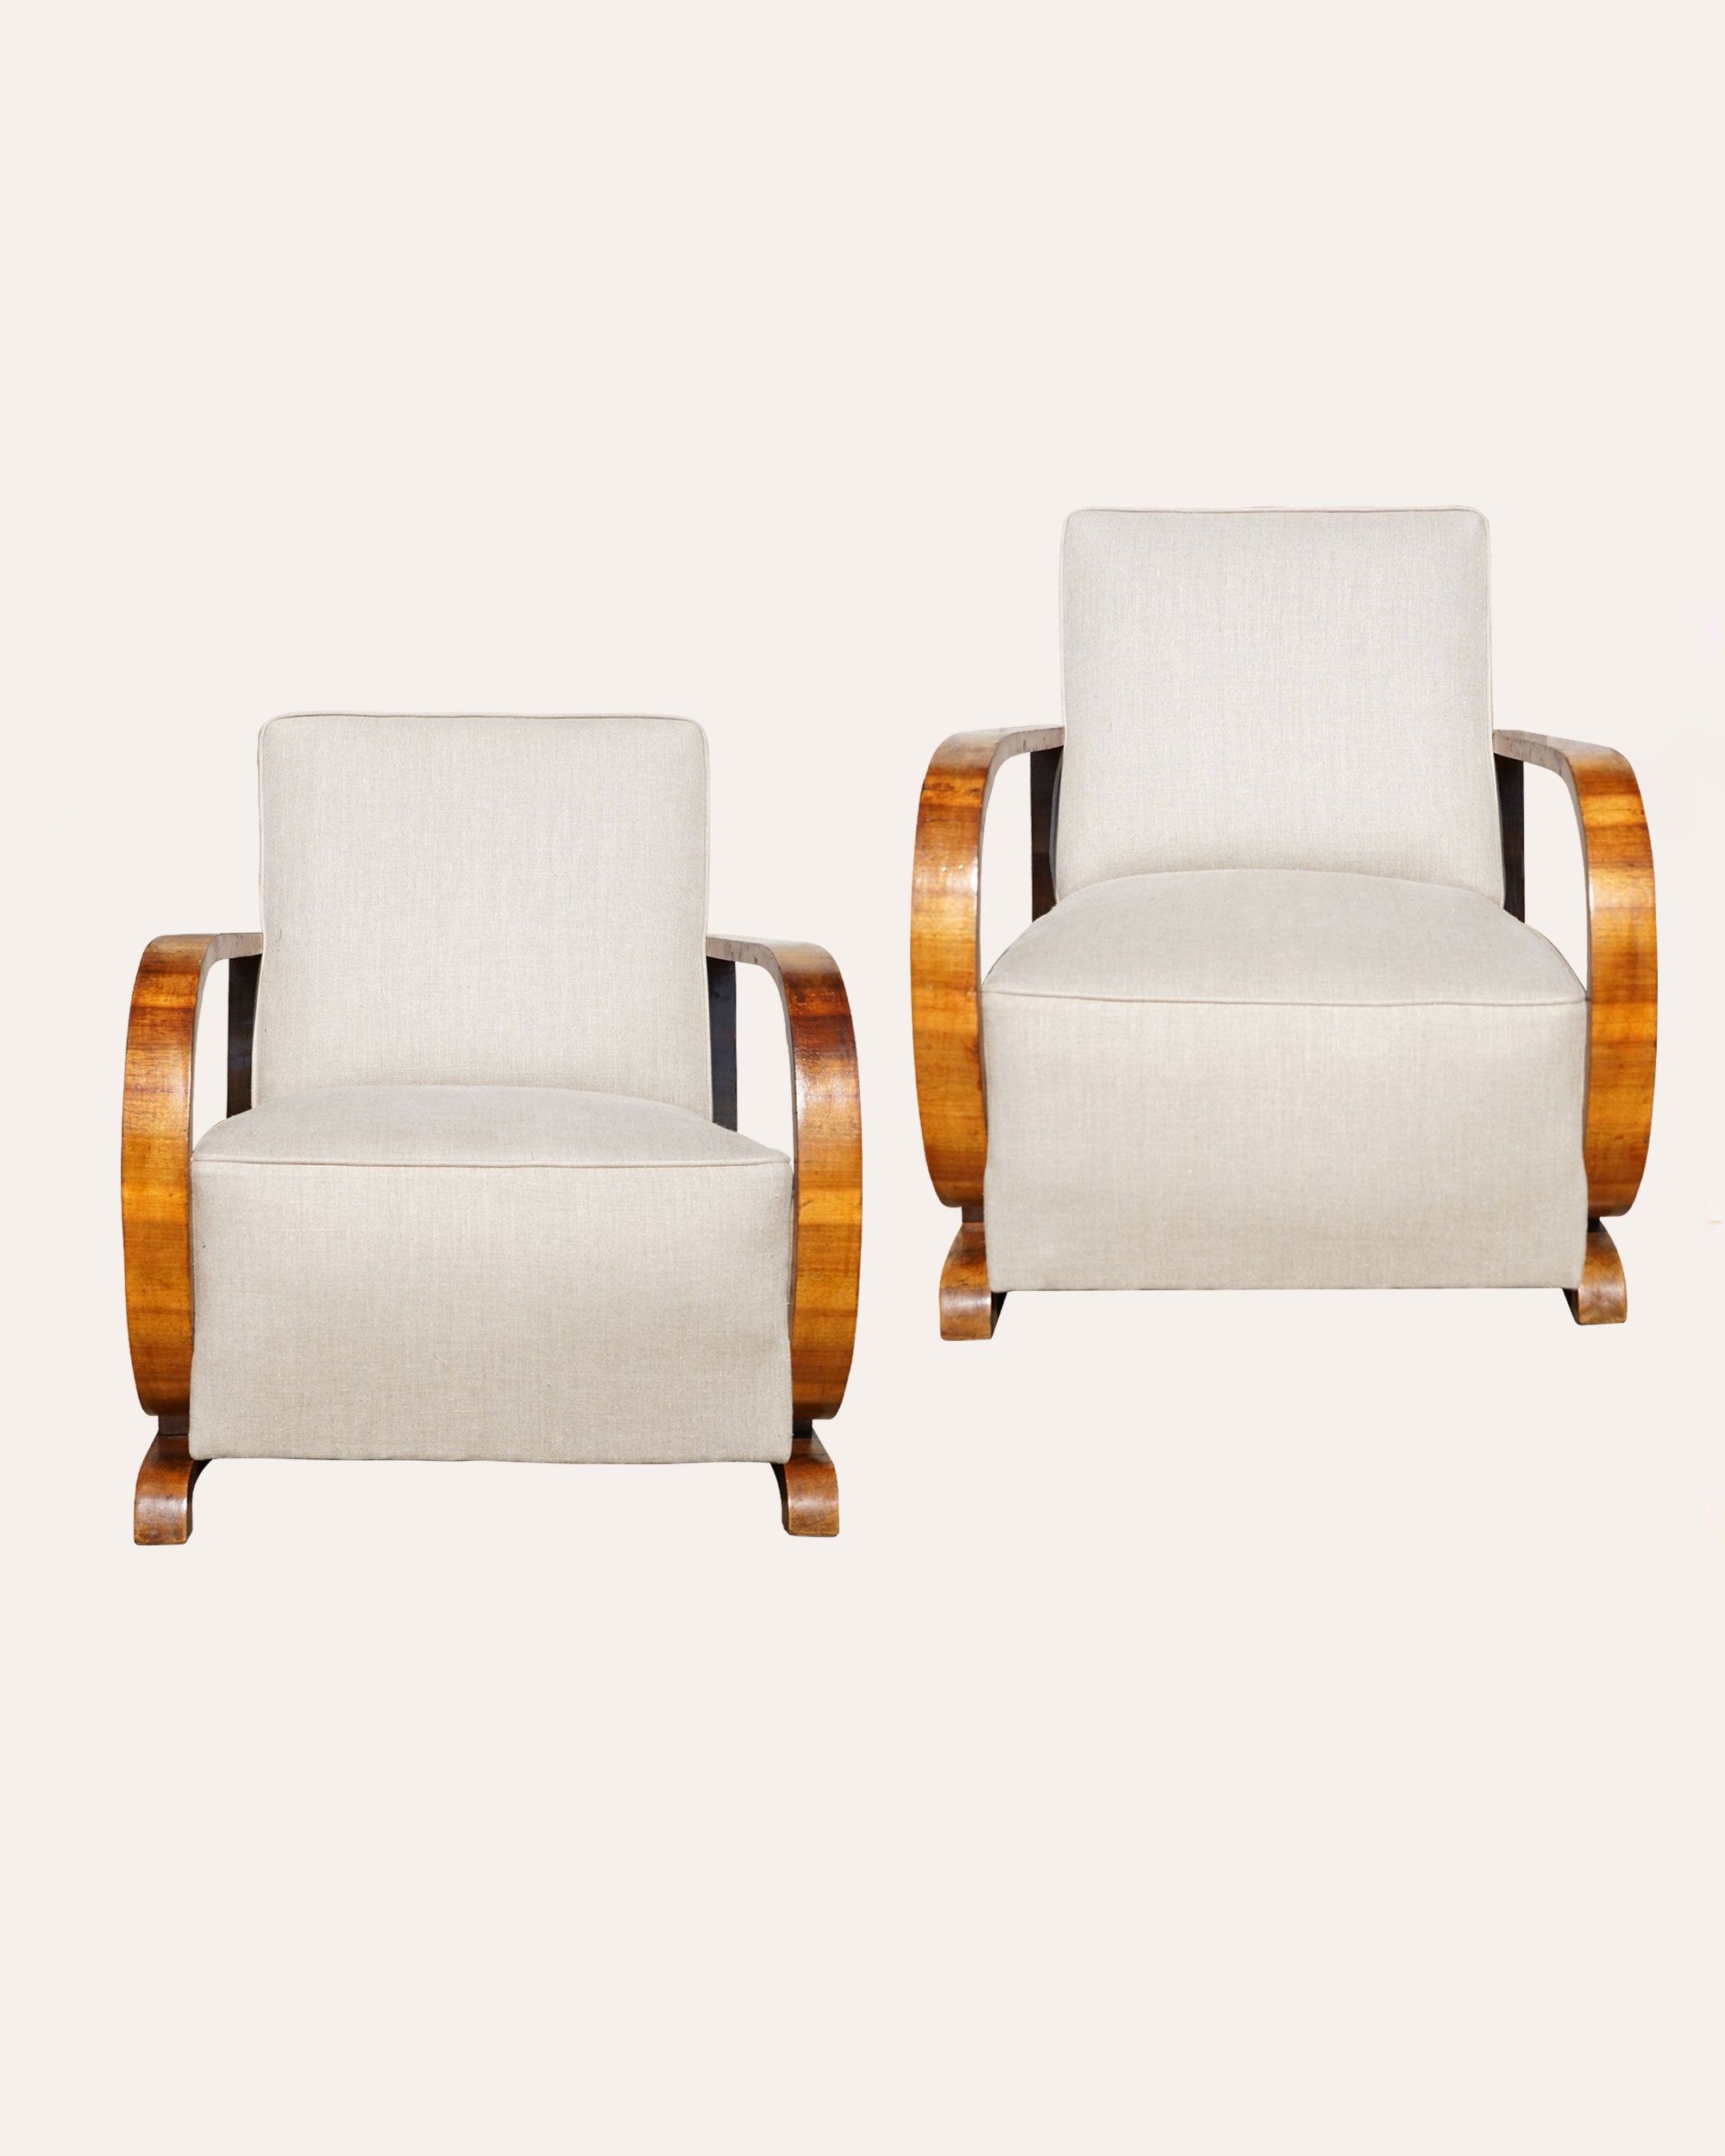 Pair of Continental Art Deco armchairs, c1920